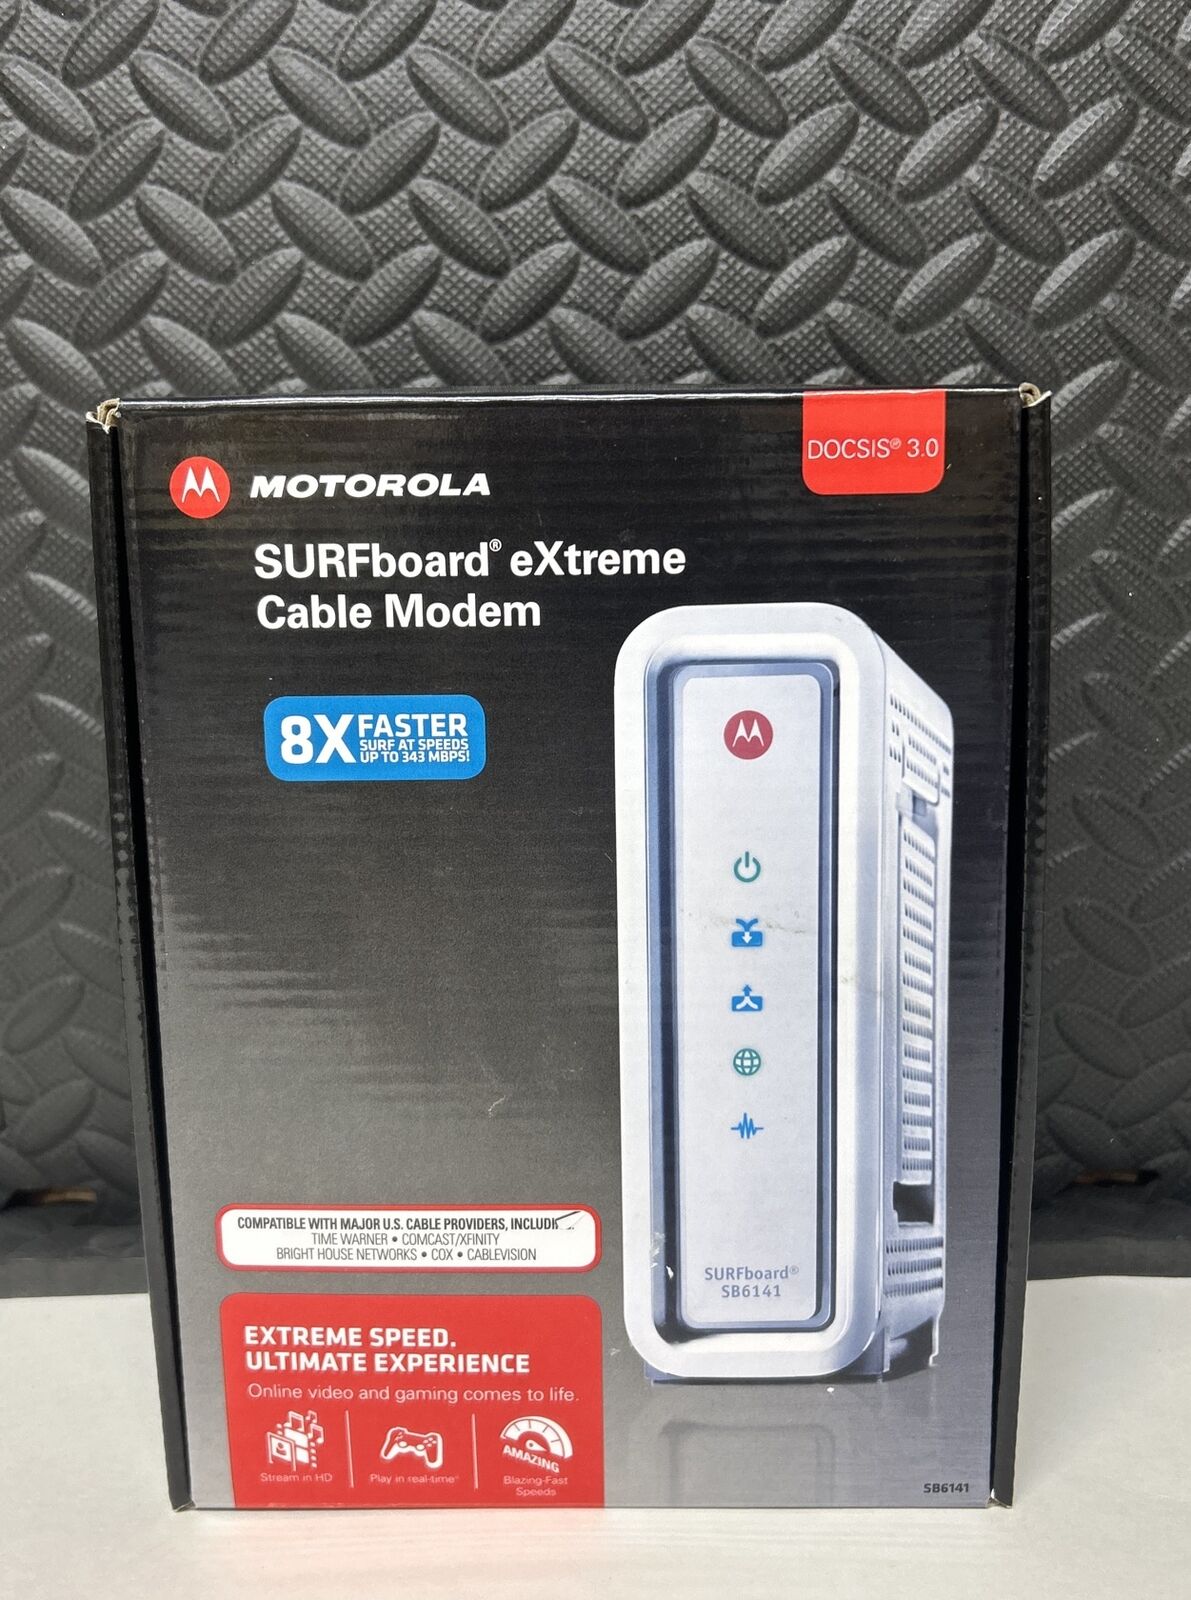 Motorola SURFboard eXtreme Cable Modem - SB6141 - 343 MBPS Perfect For Gaming